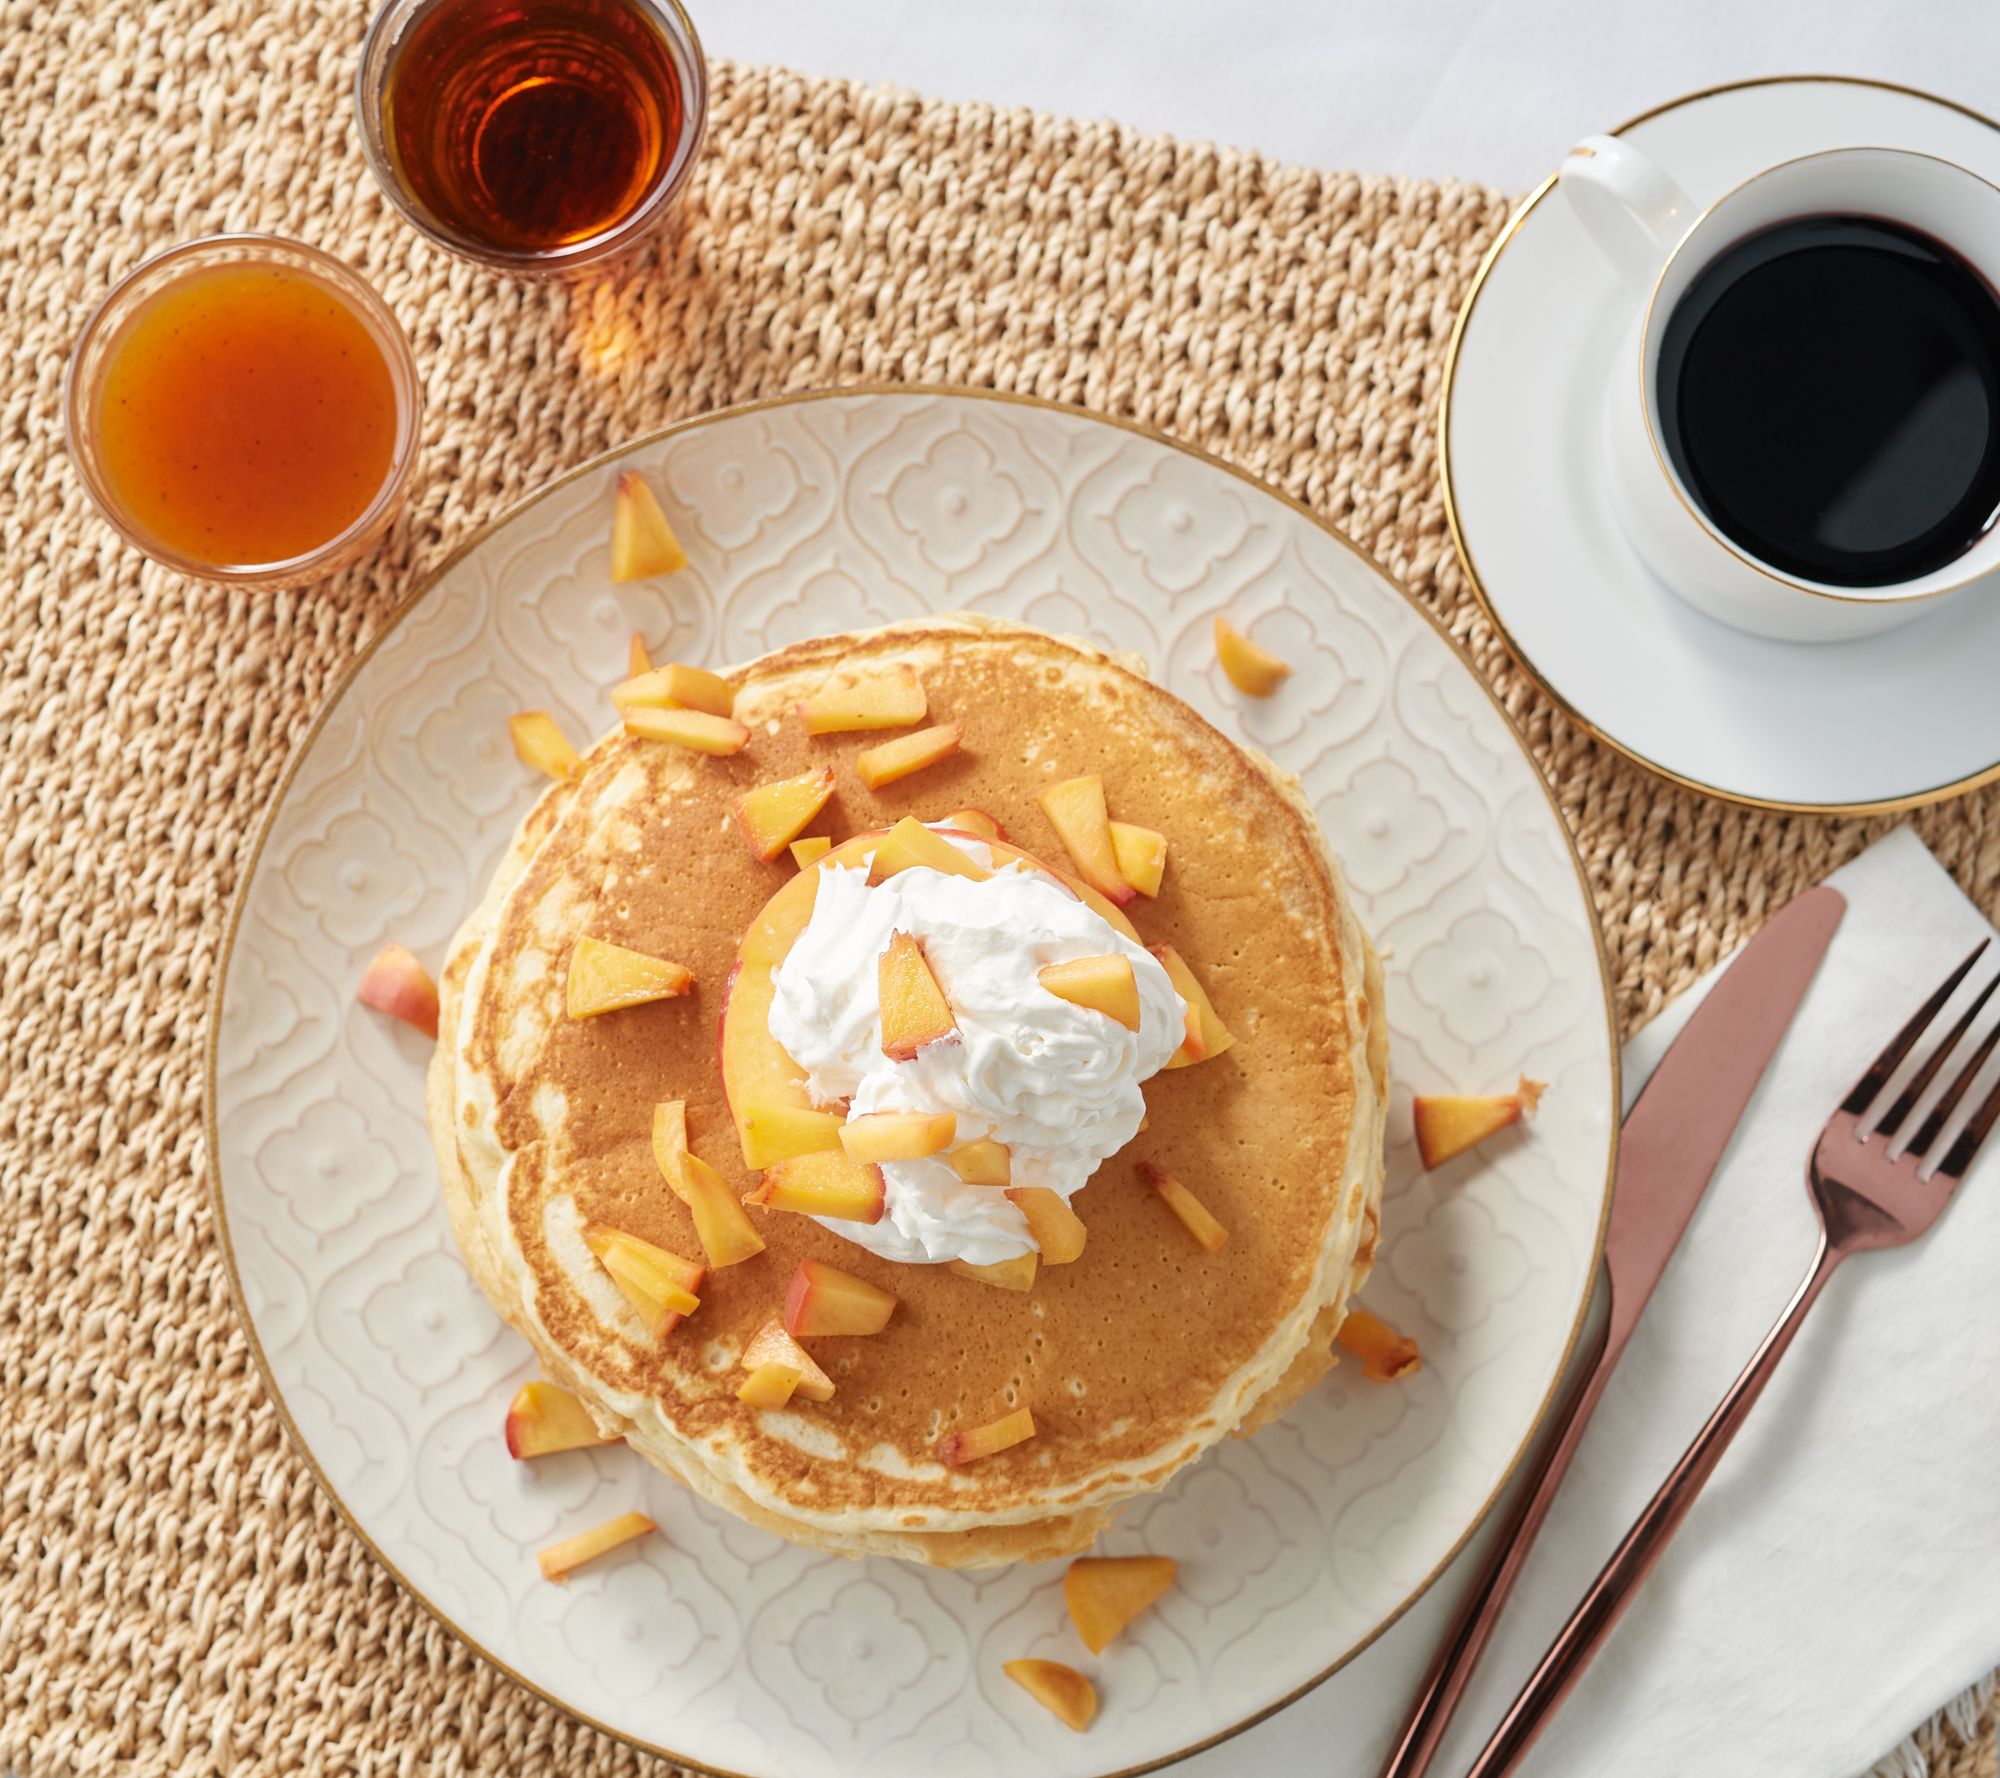 Barlow's Foods 3-in-1 Pancake Baking Mix with Peach and Maple Syrups ...